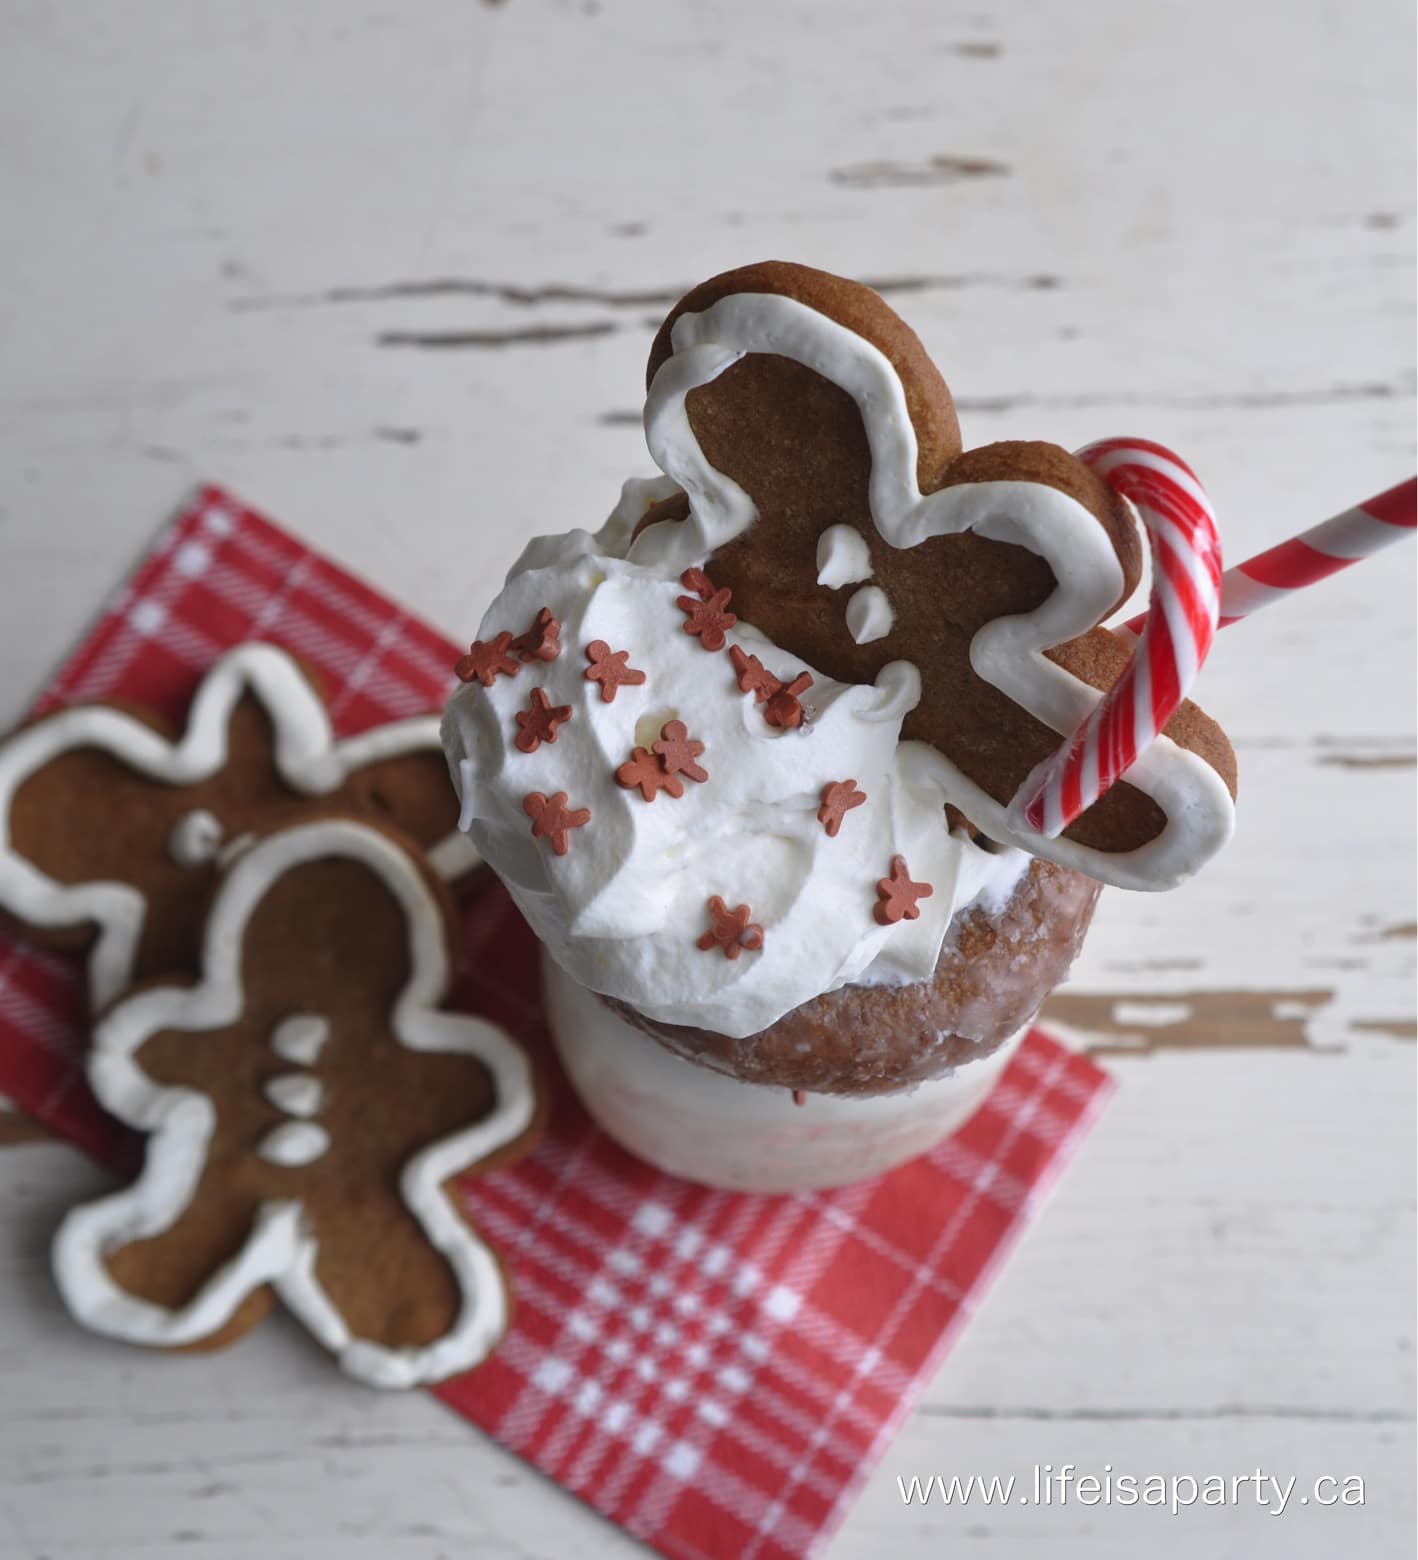 Gingerbread Extreme Milkshakes are the perfect sweet treat for the holidays. Whip up a batch of gingerbread syrup and make these amazing shakes.